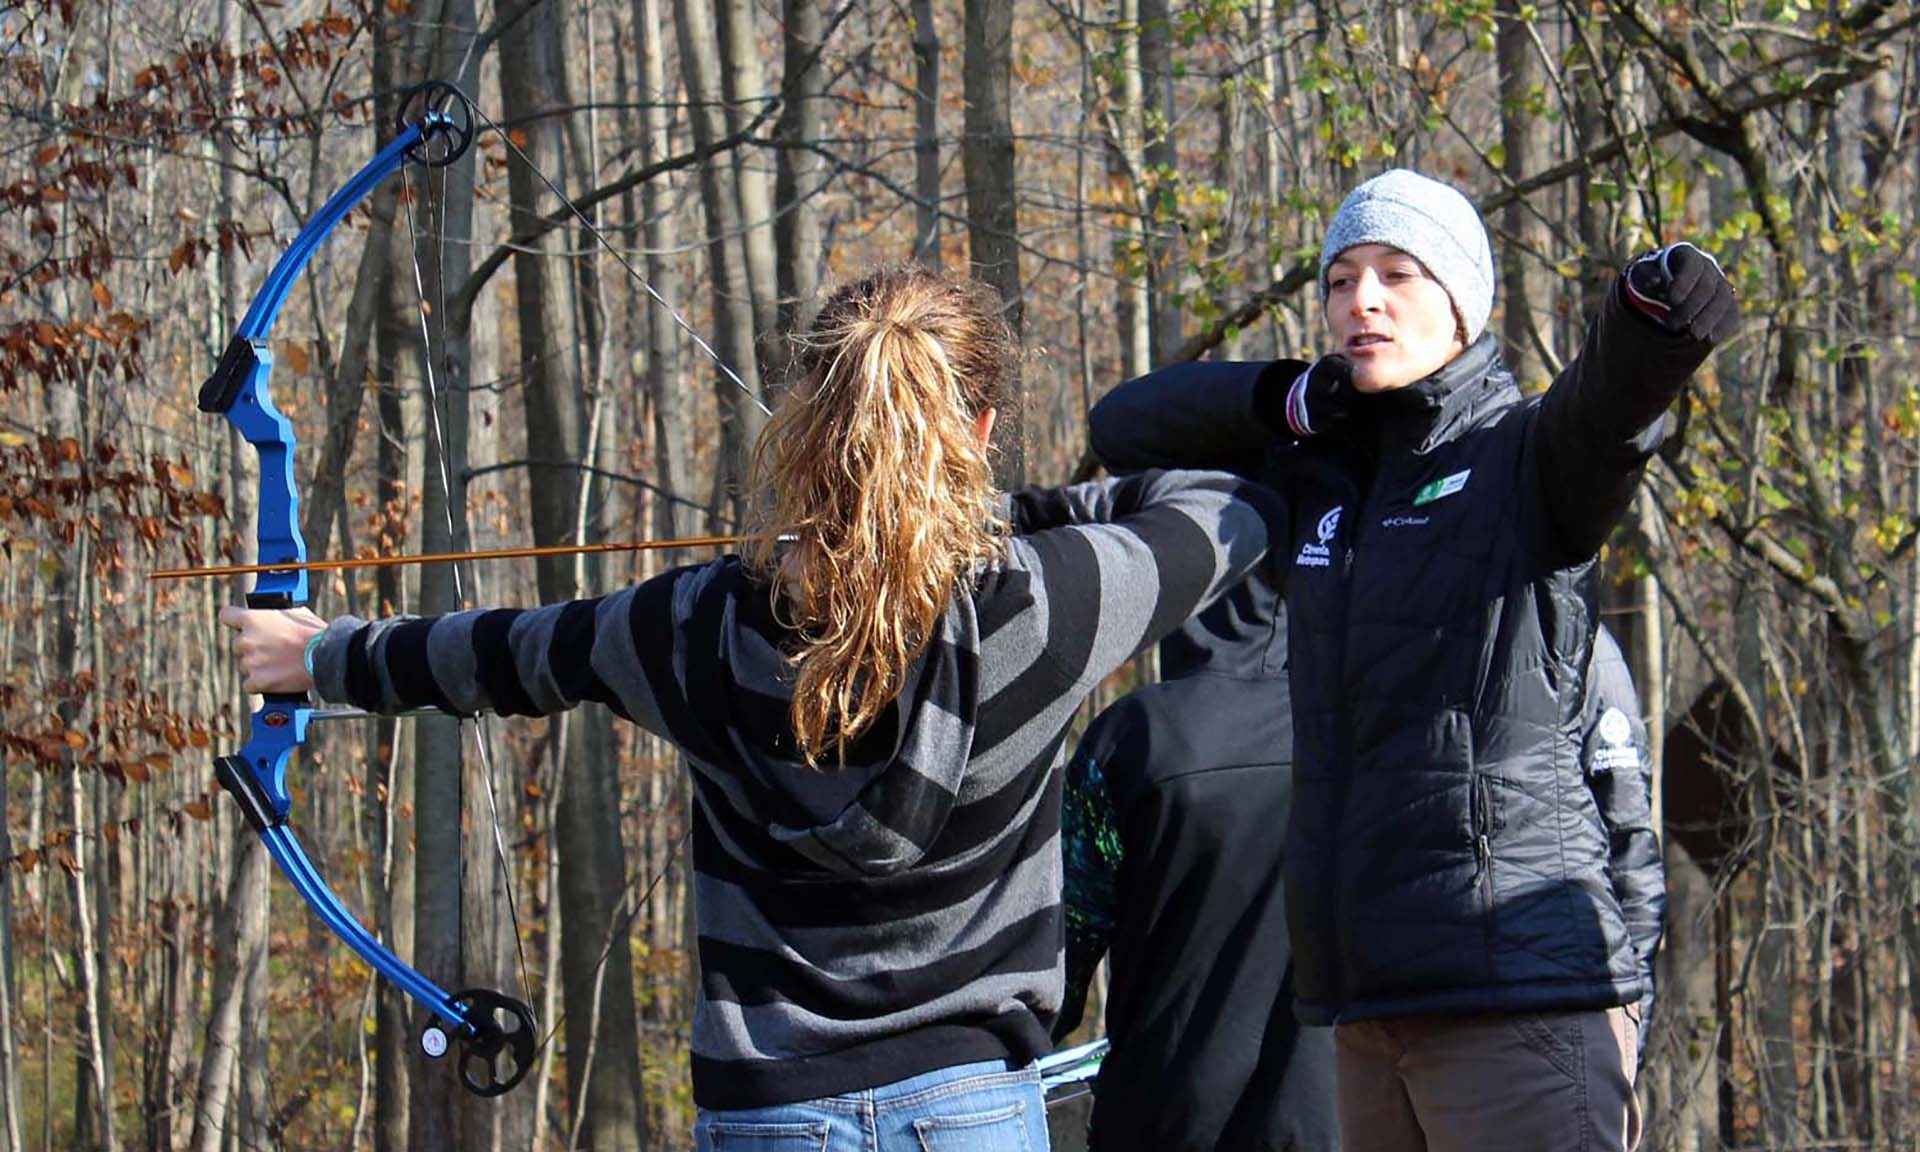 Archery for Beginners: Adults thumbnail image